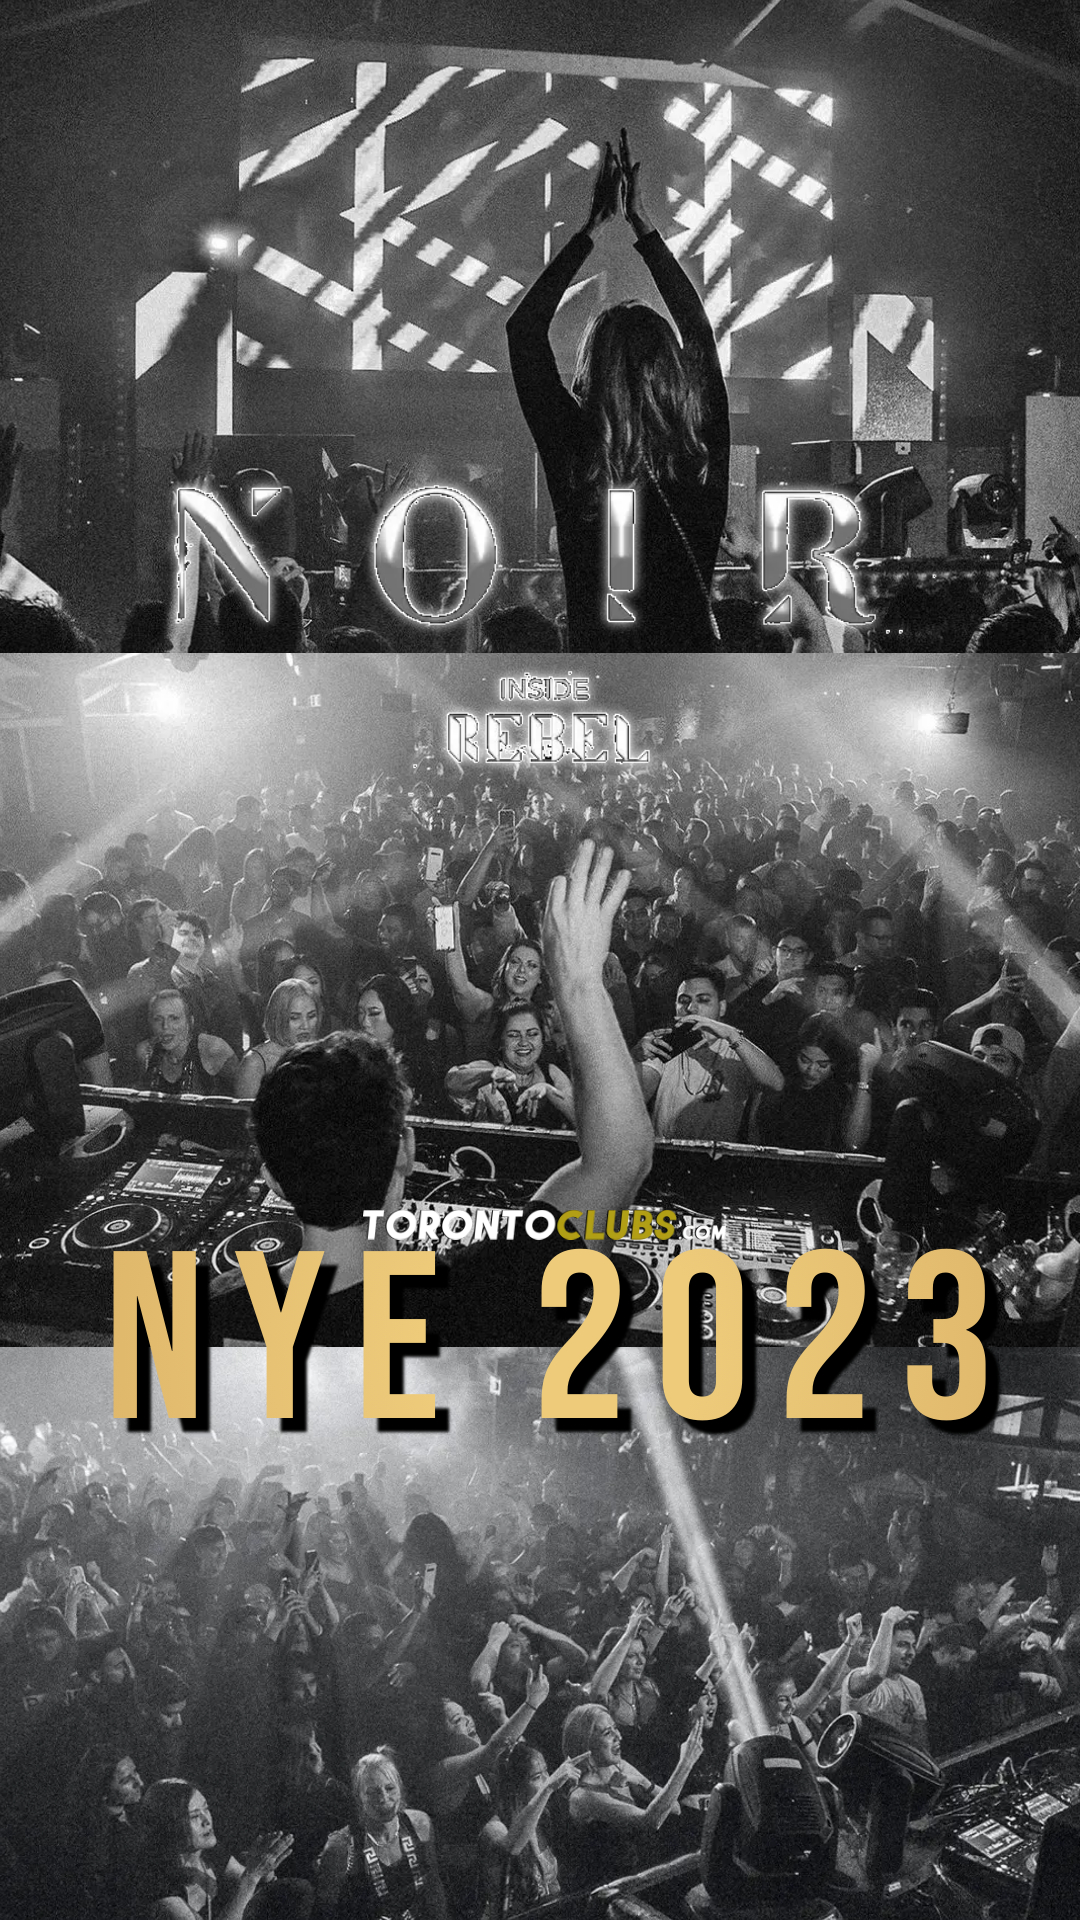 NOIR INSIDE REBEL TORONTO NEW YEARS EVE EVENT 2023 TECHNO & HOUSE PARTY